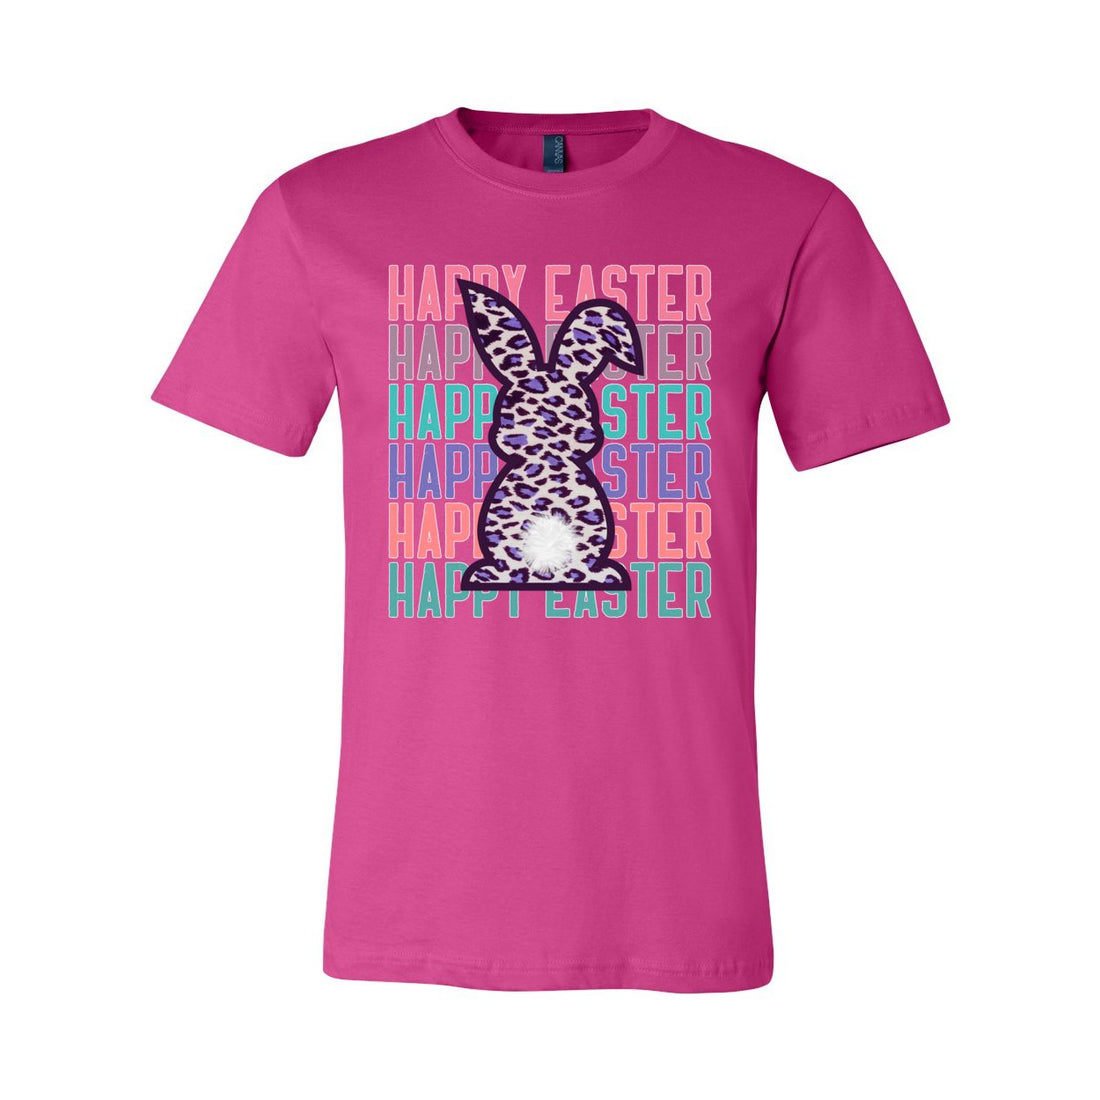 Happy Easter Repeat Tee - T-Shirts - Positively Sassy - Happy Easter Repeat Tee